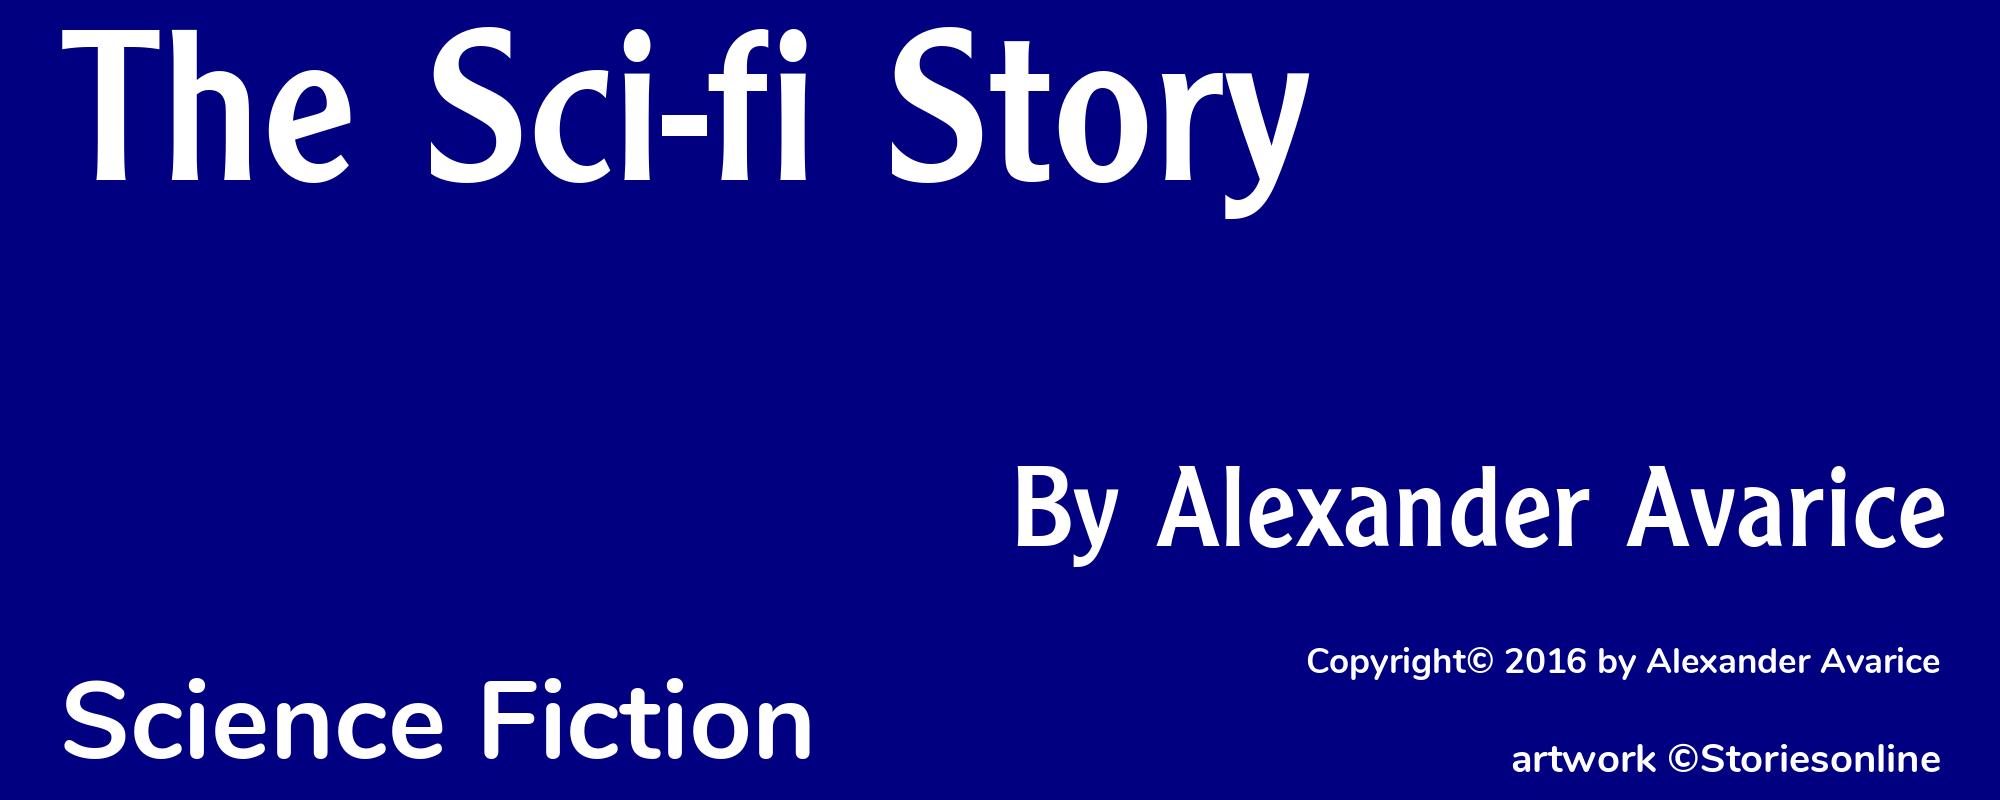 The Sci-fi Story - Cover